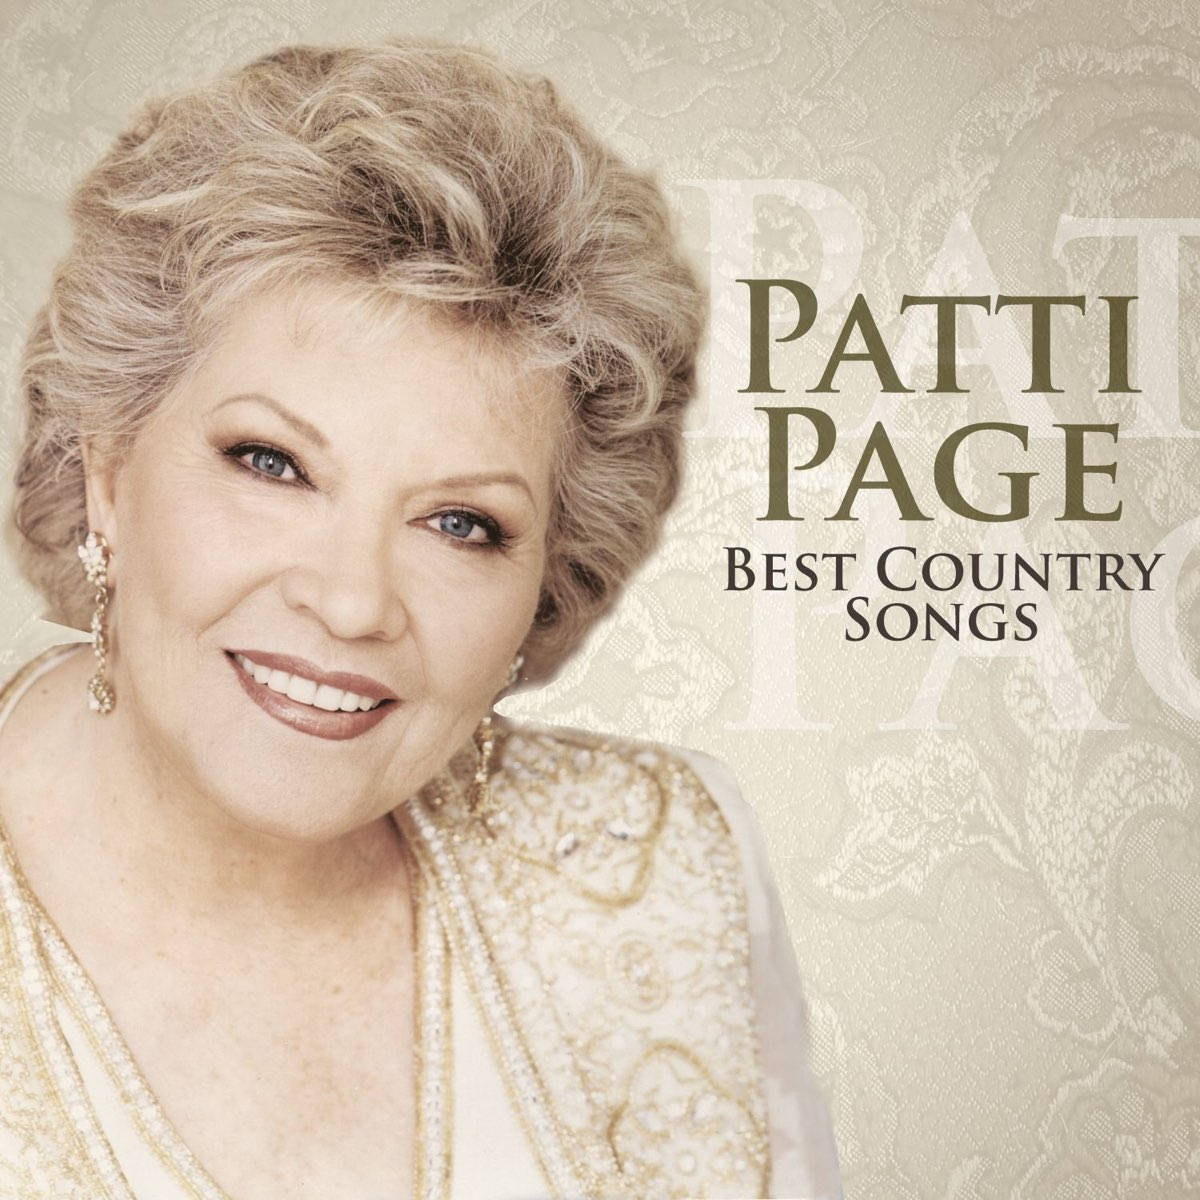 Patti Page Best Country Songs Album Wallpaper